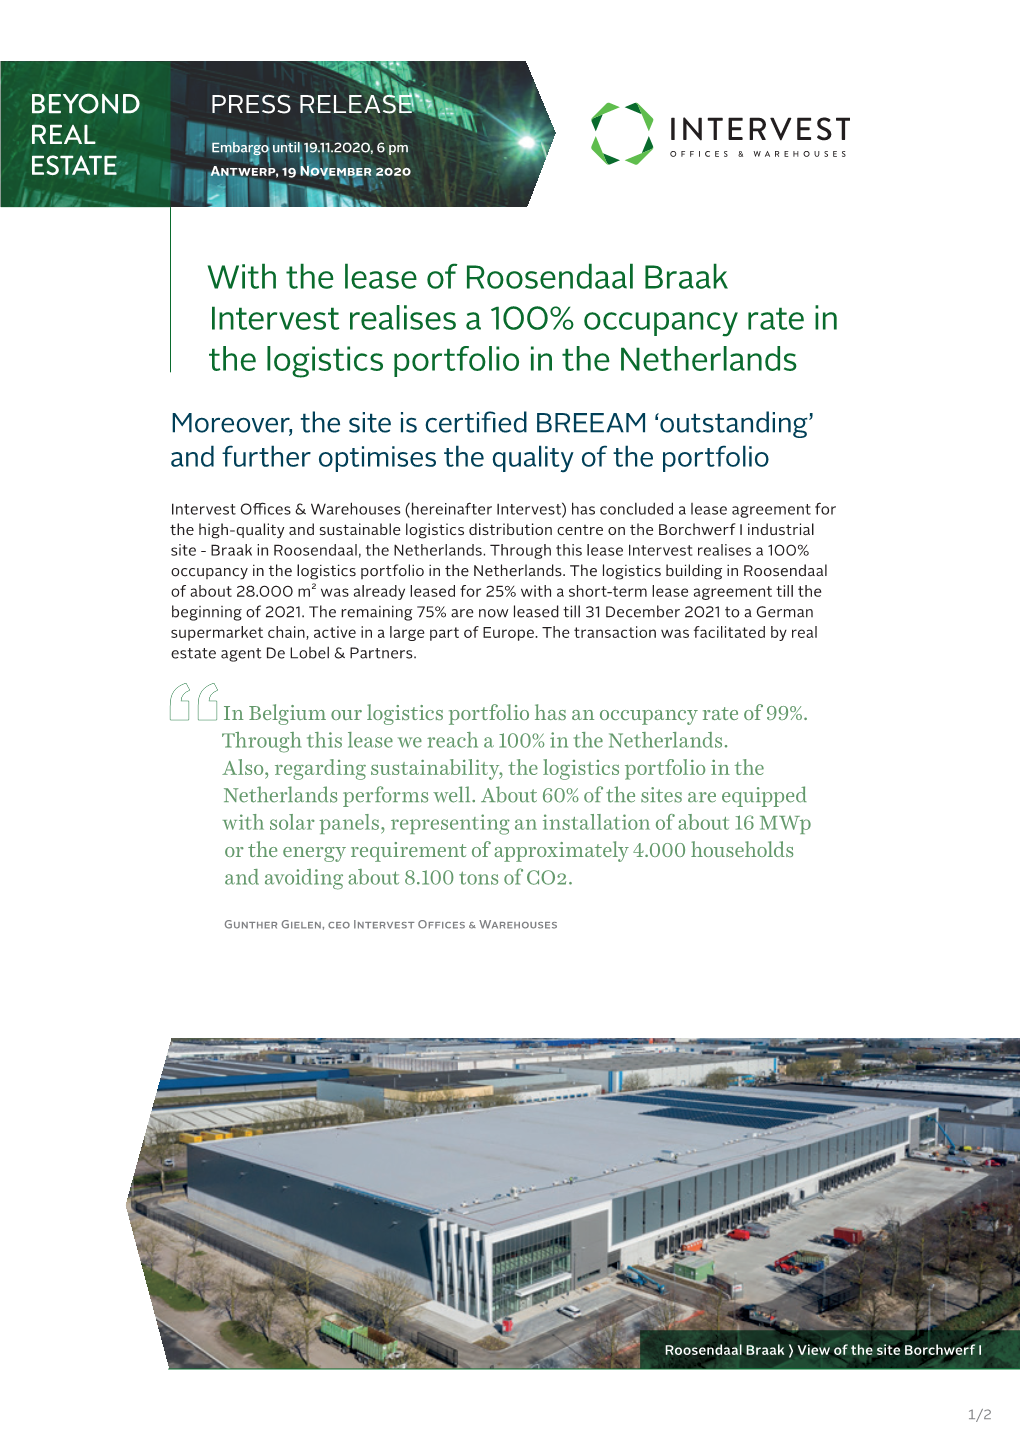 With the Lease of Roosendaal Braak Intervest Realises a 100% Occupancy Rate in the Logistics Portfolio in the Netherlands